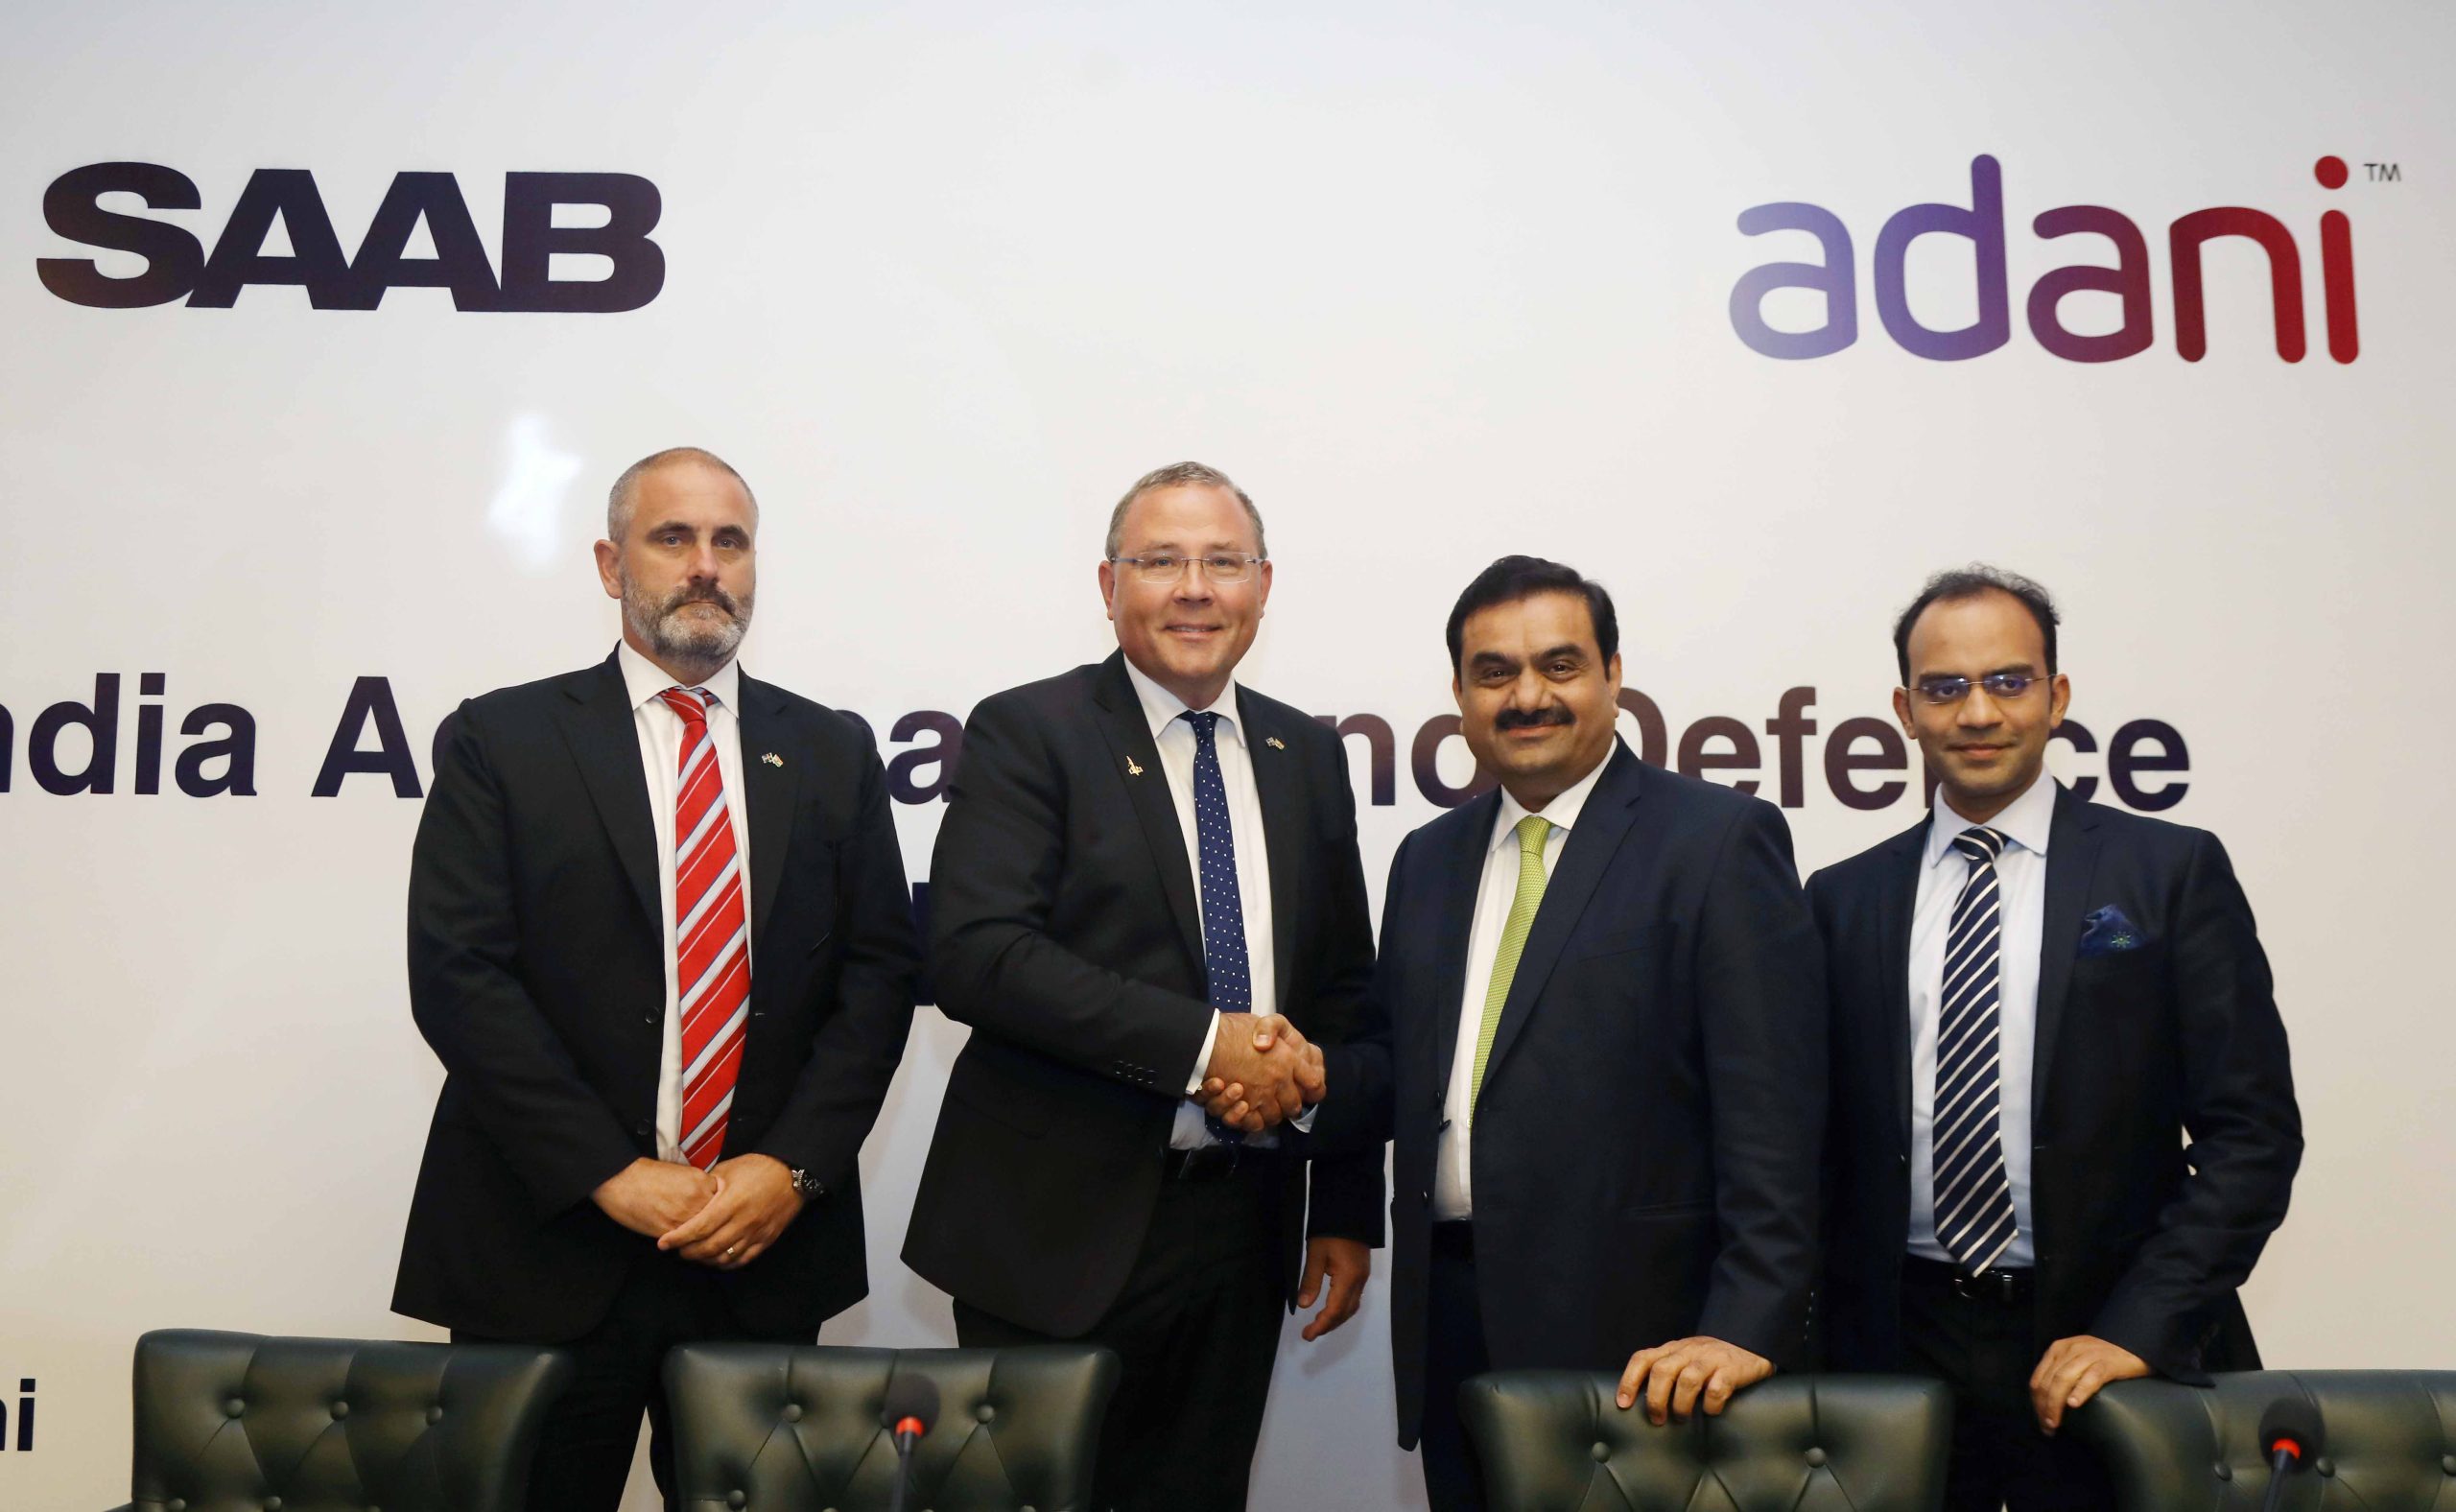 Saab partners India’s Adani Group in an effort to realize its ‘Make in India’ offer for the Gripen fighter aircraft.